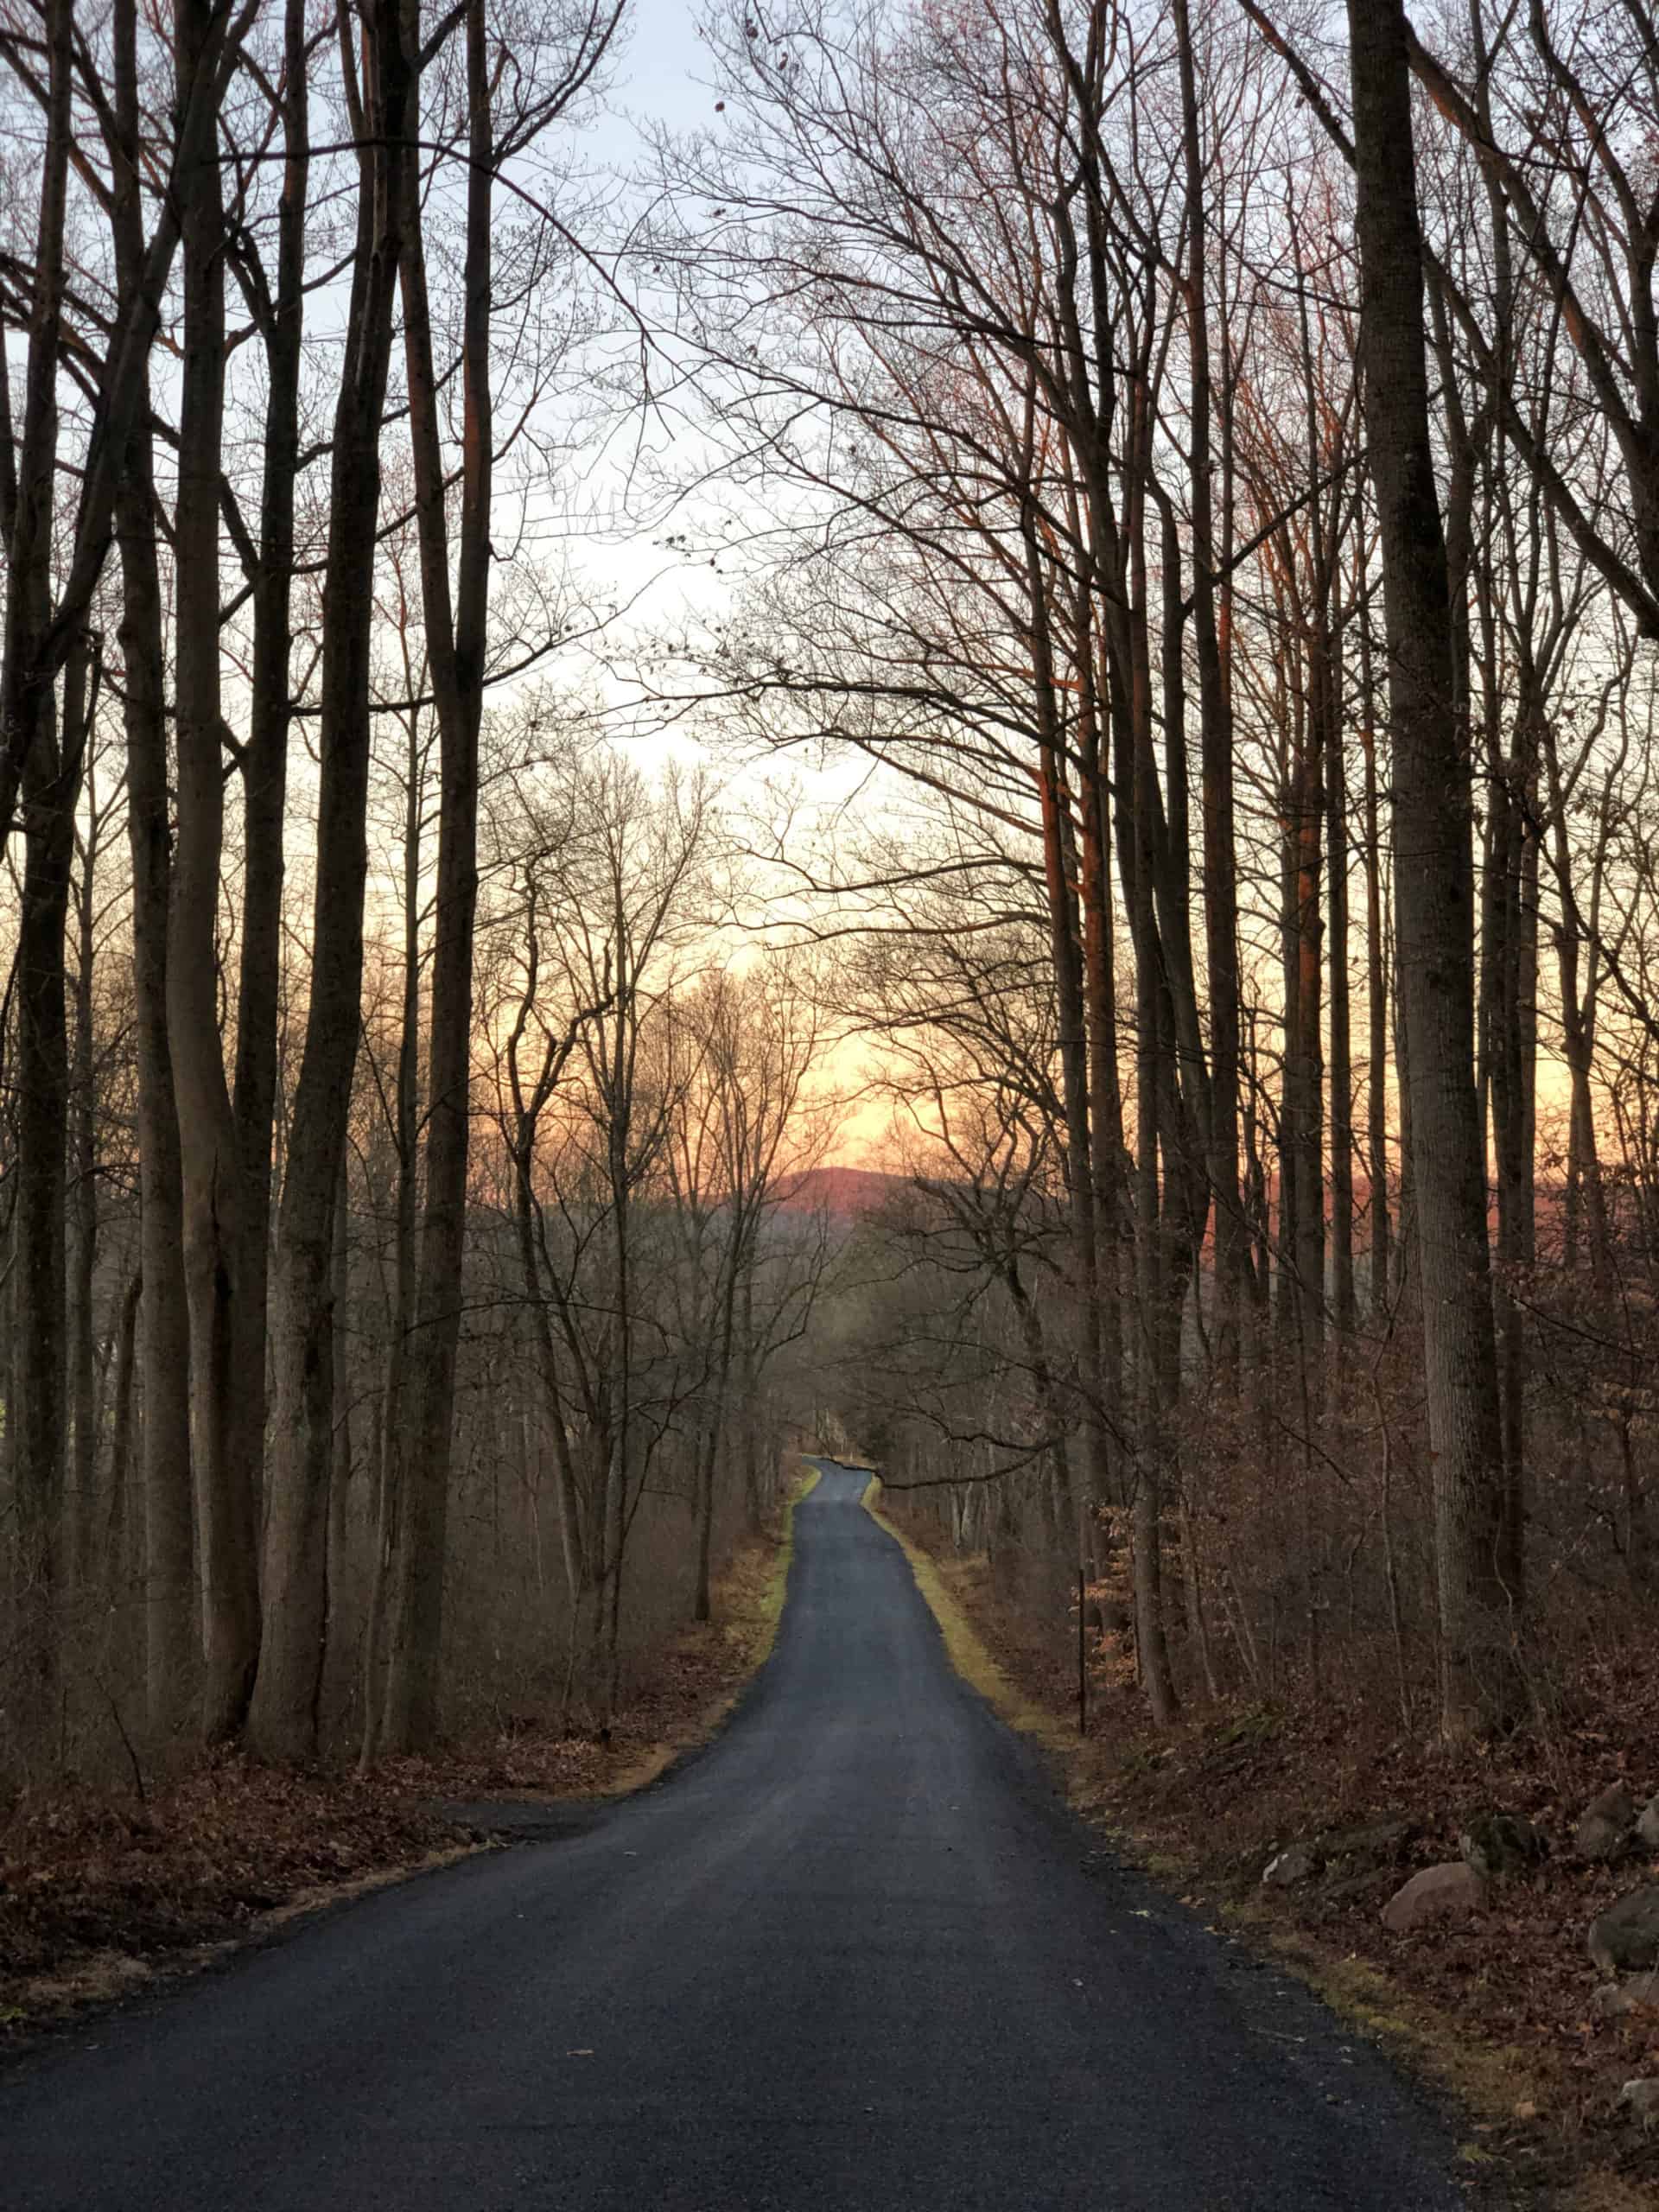 Road disappearing into the distance at sunset with bare forest trees high above